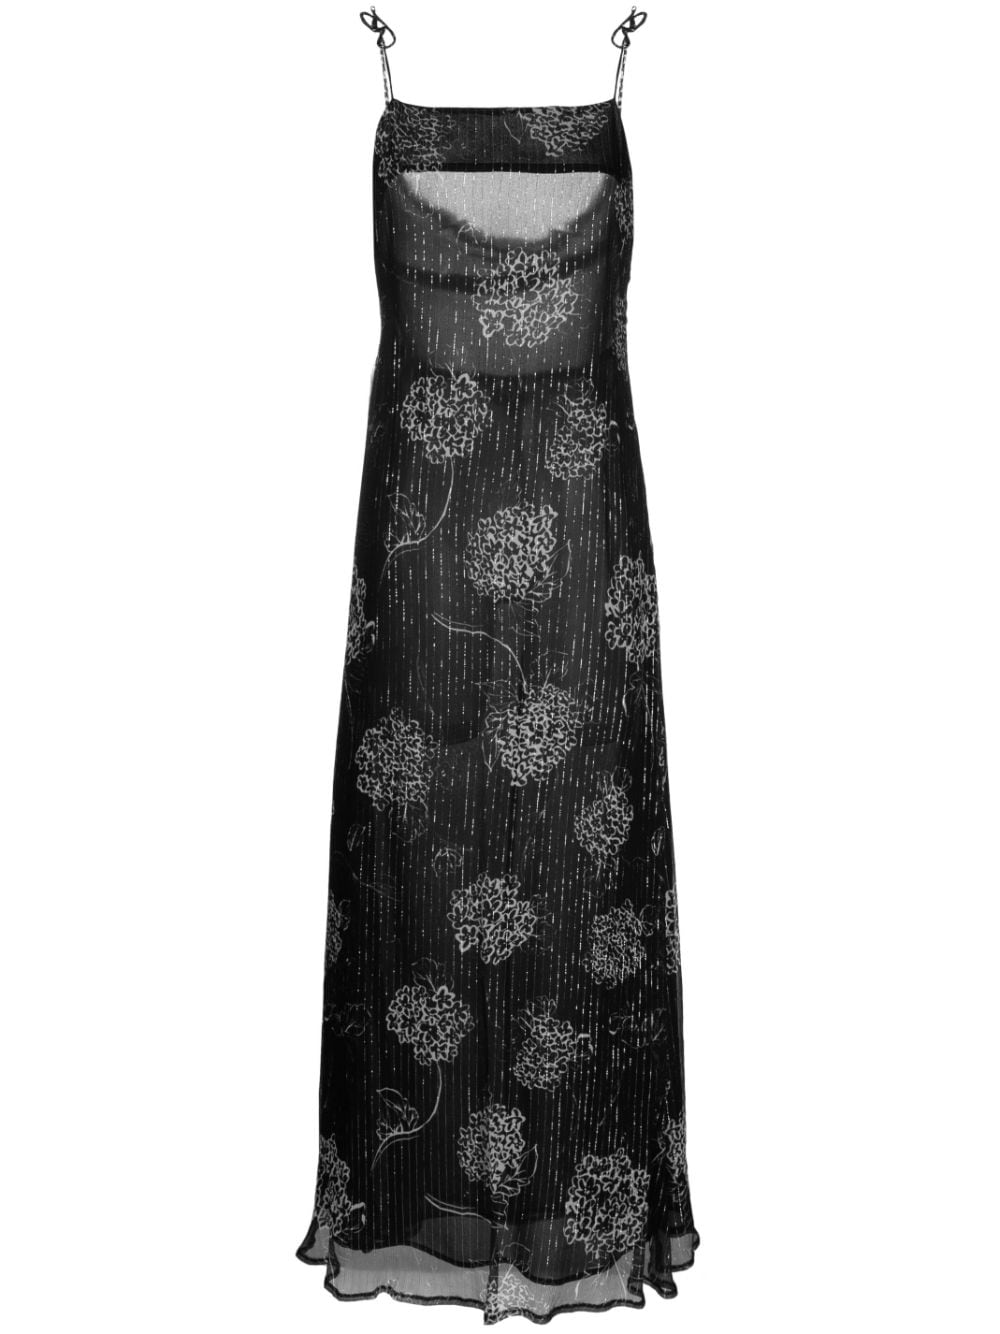 We Are Kindred Cerelia floral-print maxi dress - Black von We Are Kindred